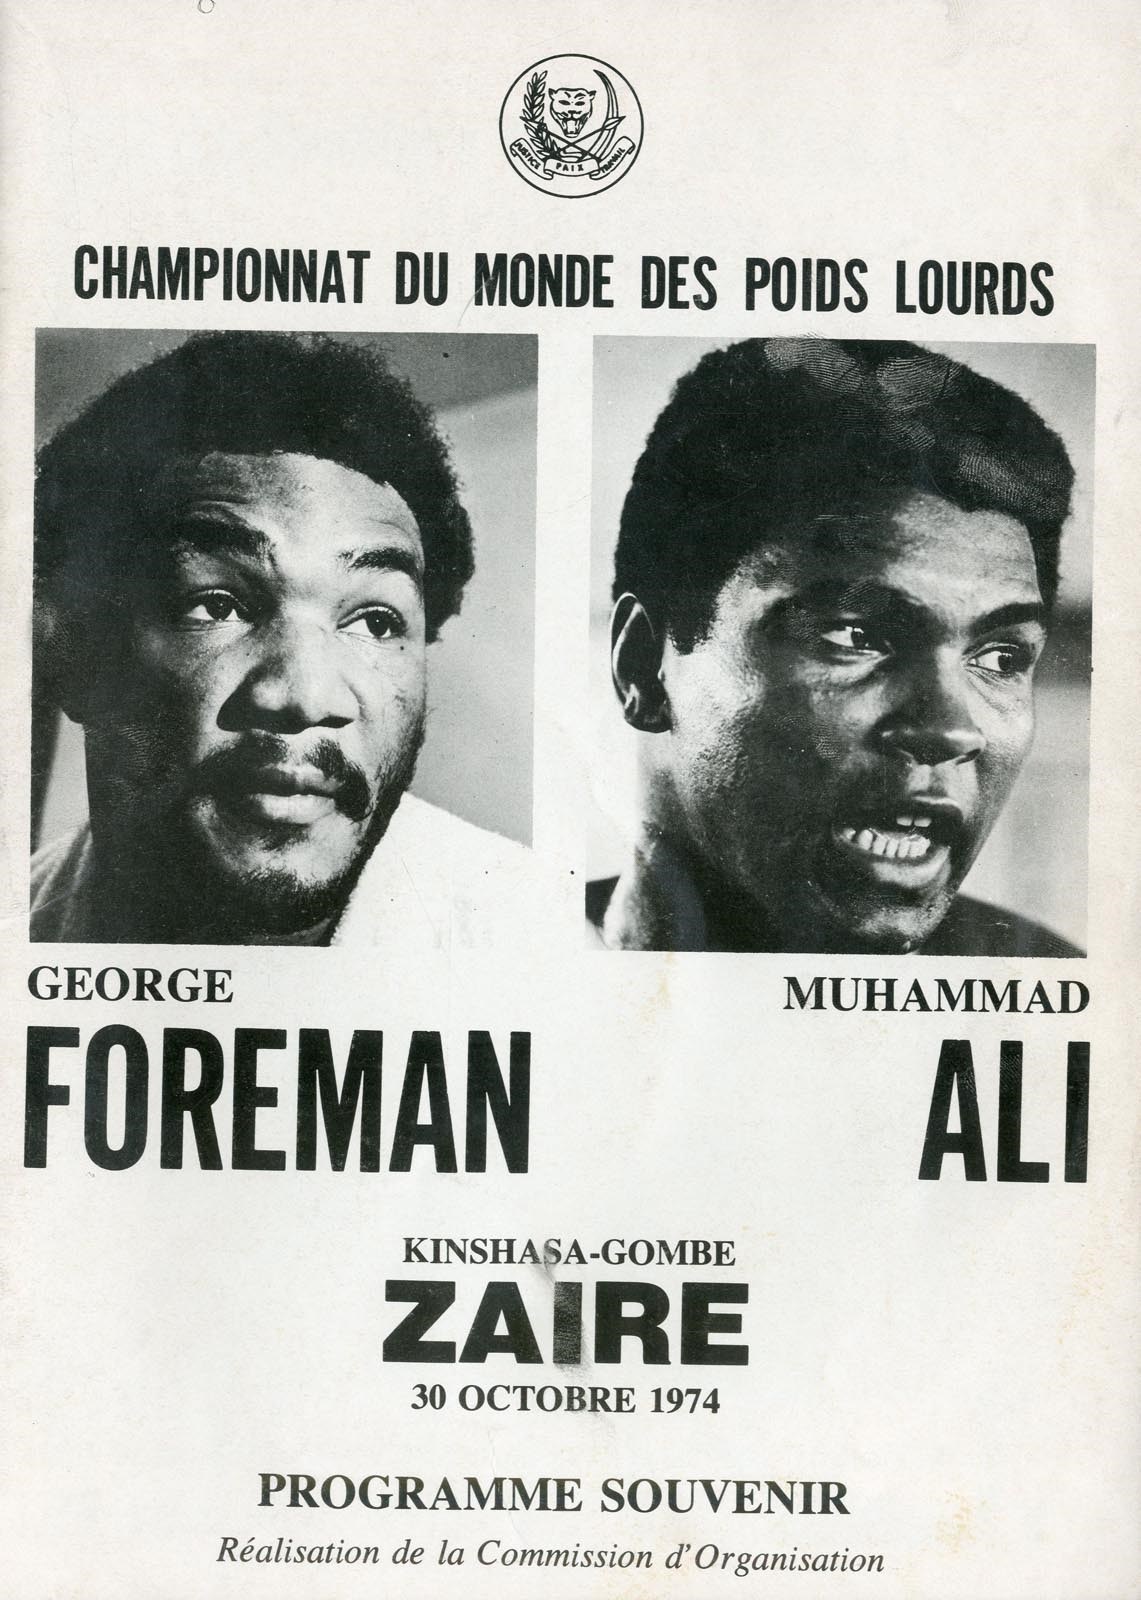 Best of the Best - 1974 Muhammad Ali vs. George Foreman "Rumble in the Jungle" On-Site Program